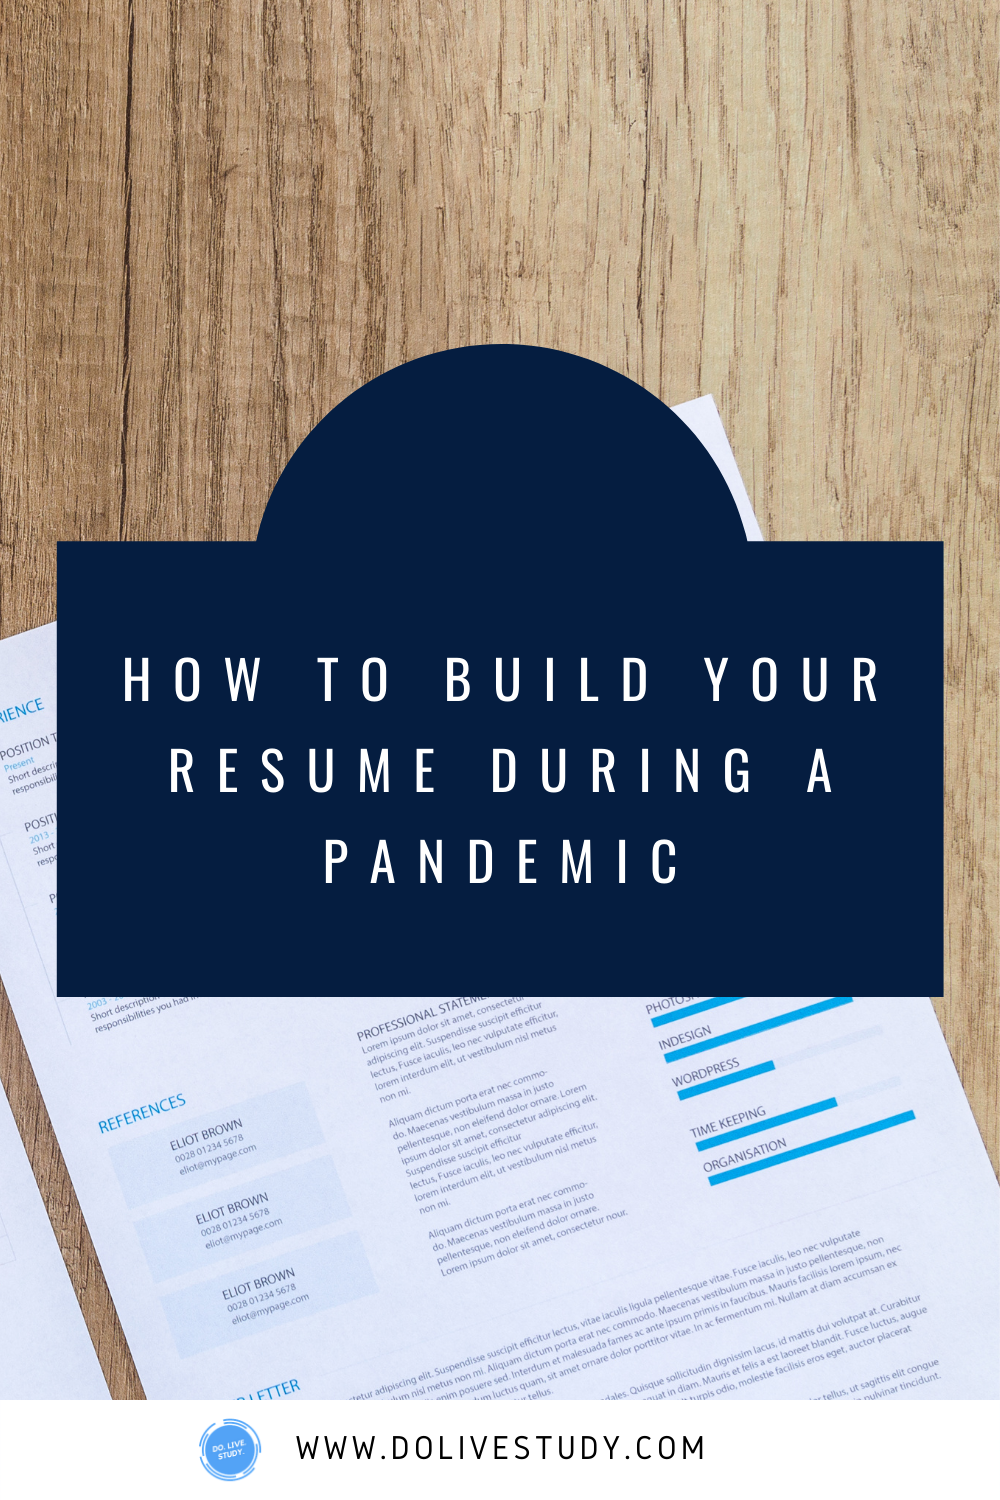 2 - How To Build Your Resume While Social Distancing